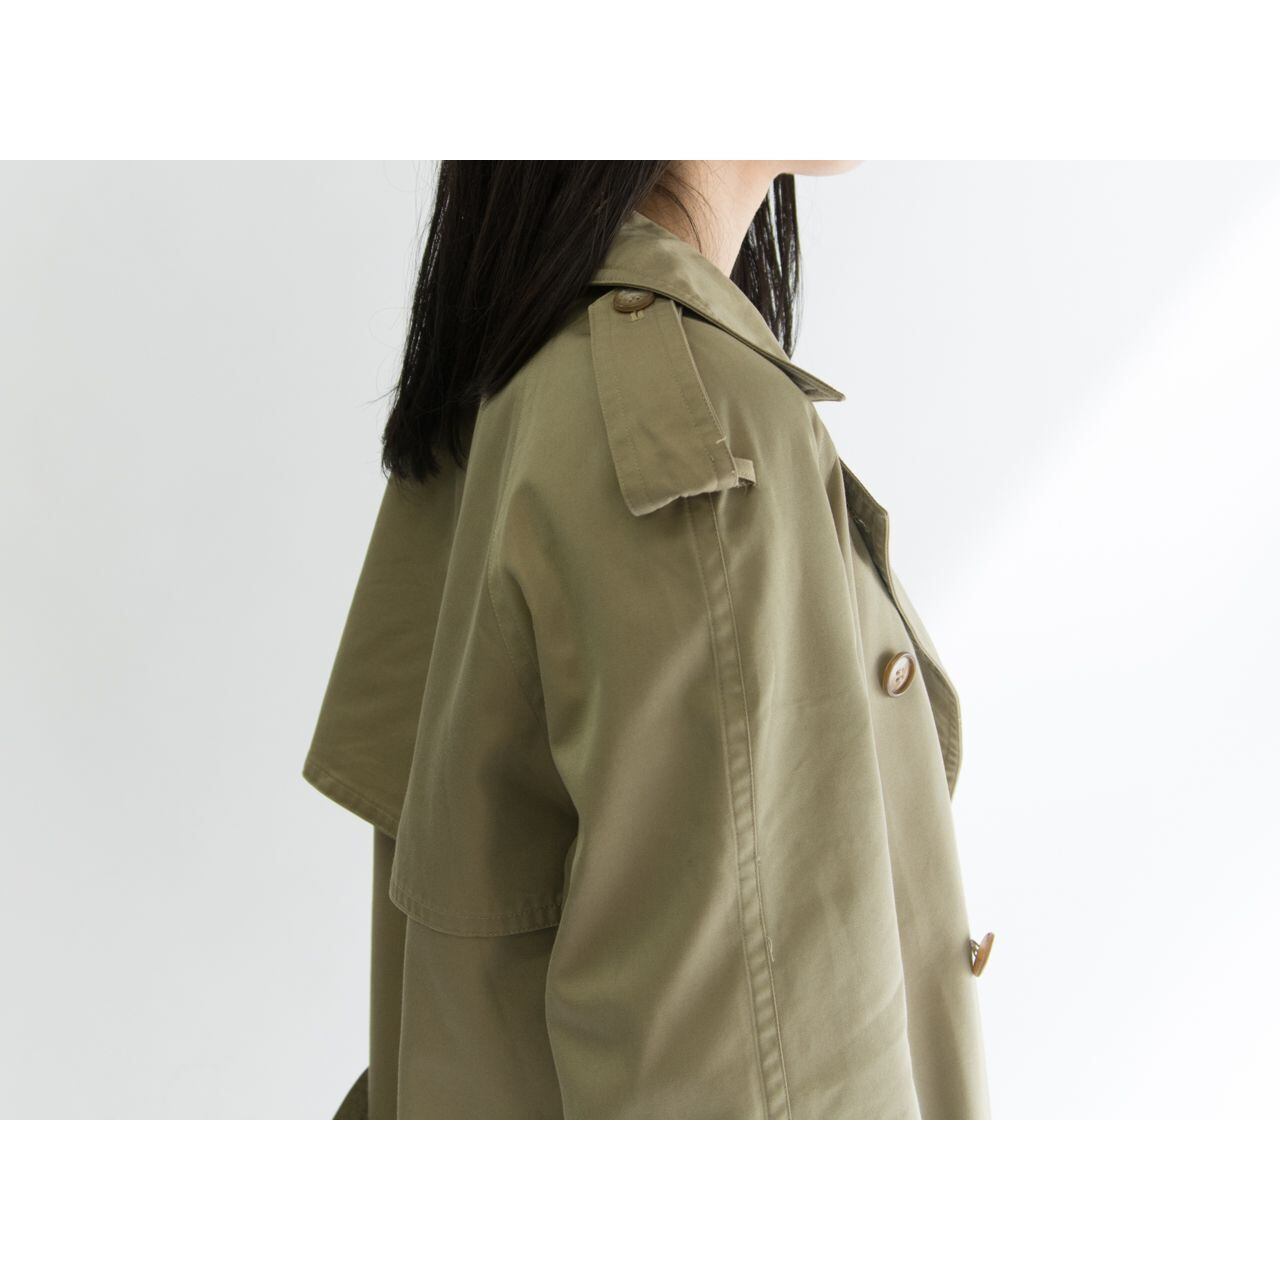 Itokin Vintage】Made in Japan cotton-polyester trench coat ...